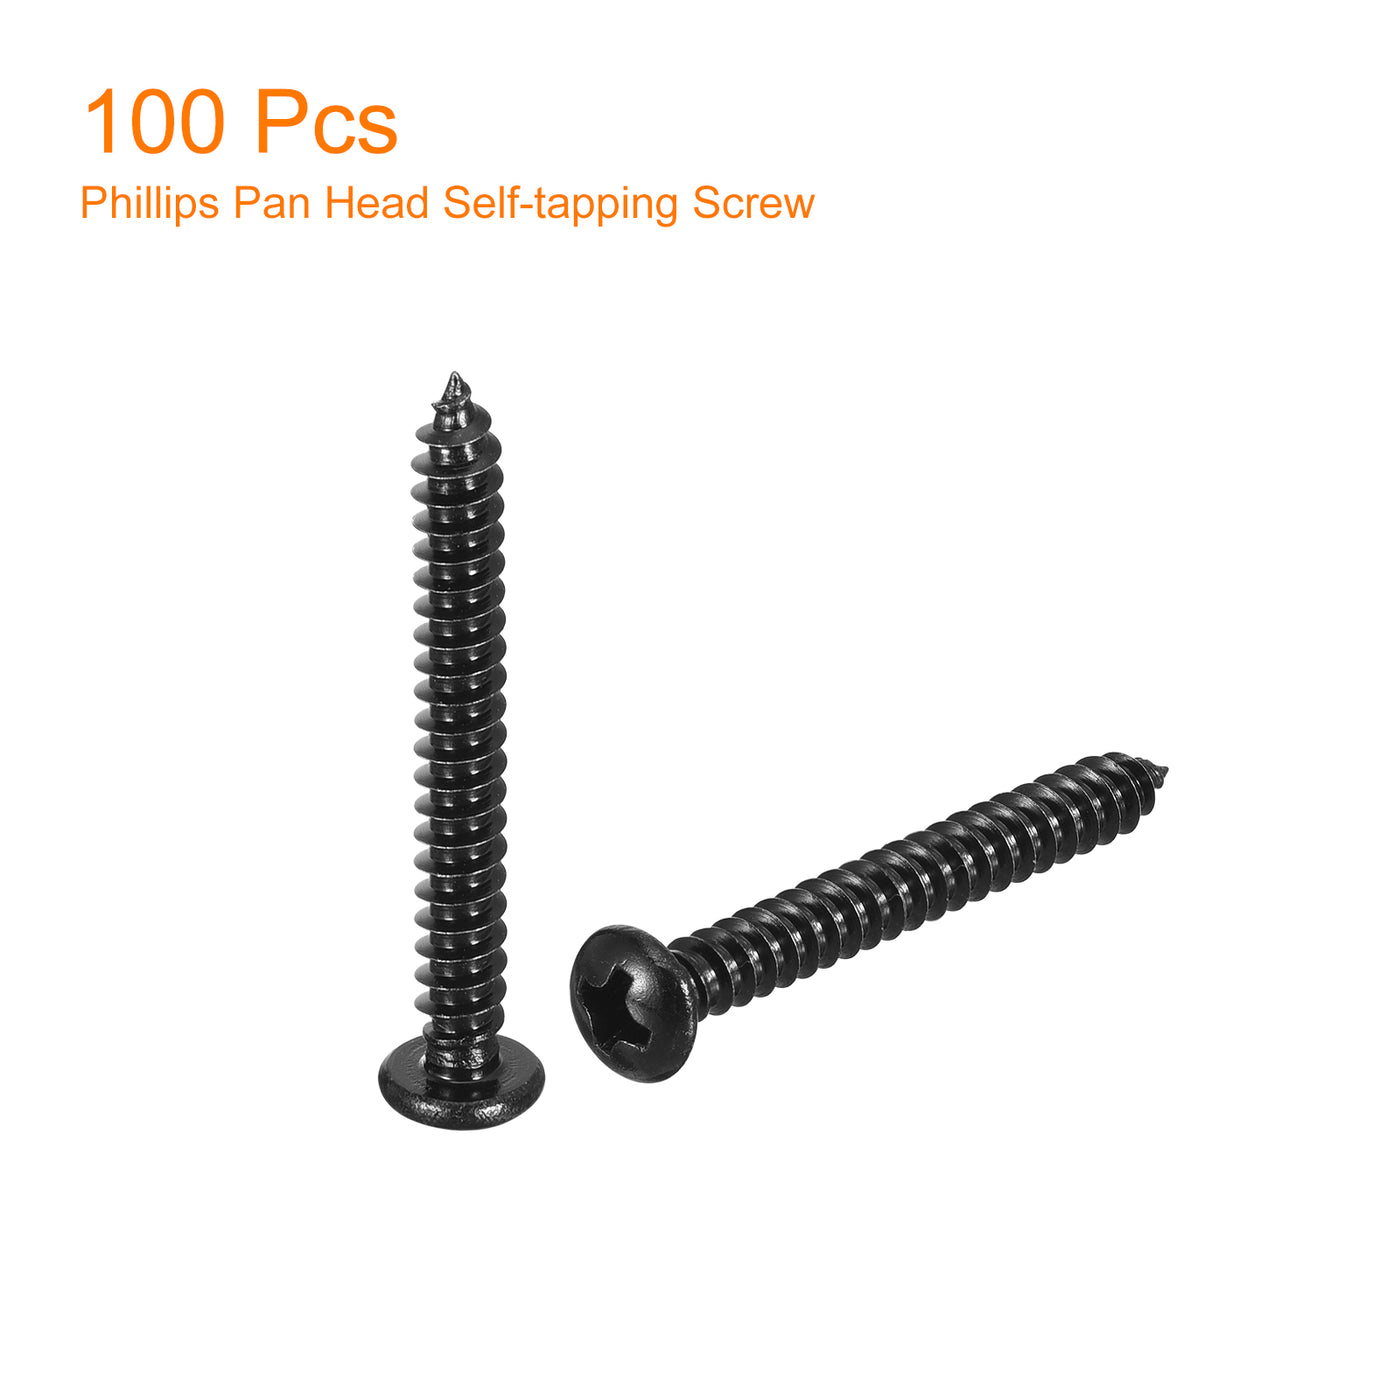 uxcell Uxcell #8 x 1-3/8" Phillips Pan Head Self-tapping Screw, 100pcs - 304 Stainless Steel Round Head Wood Screw Full Thread (Black)